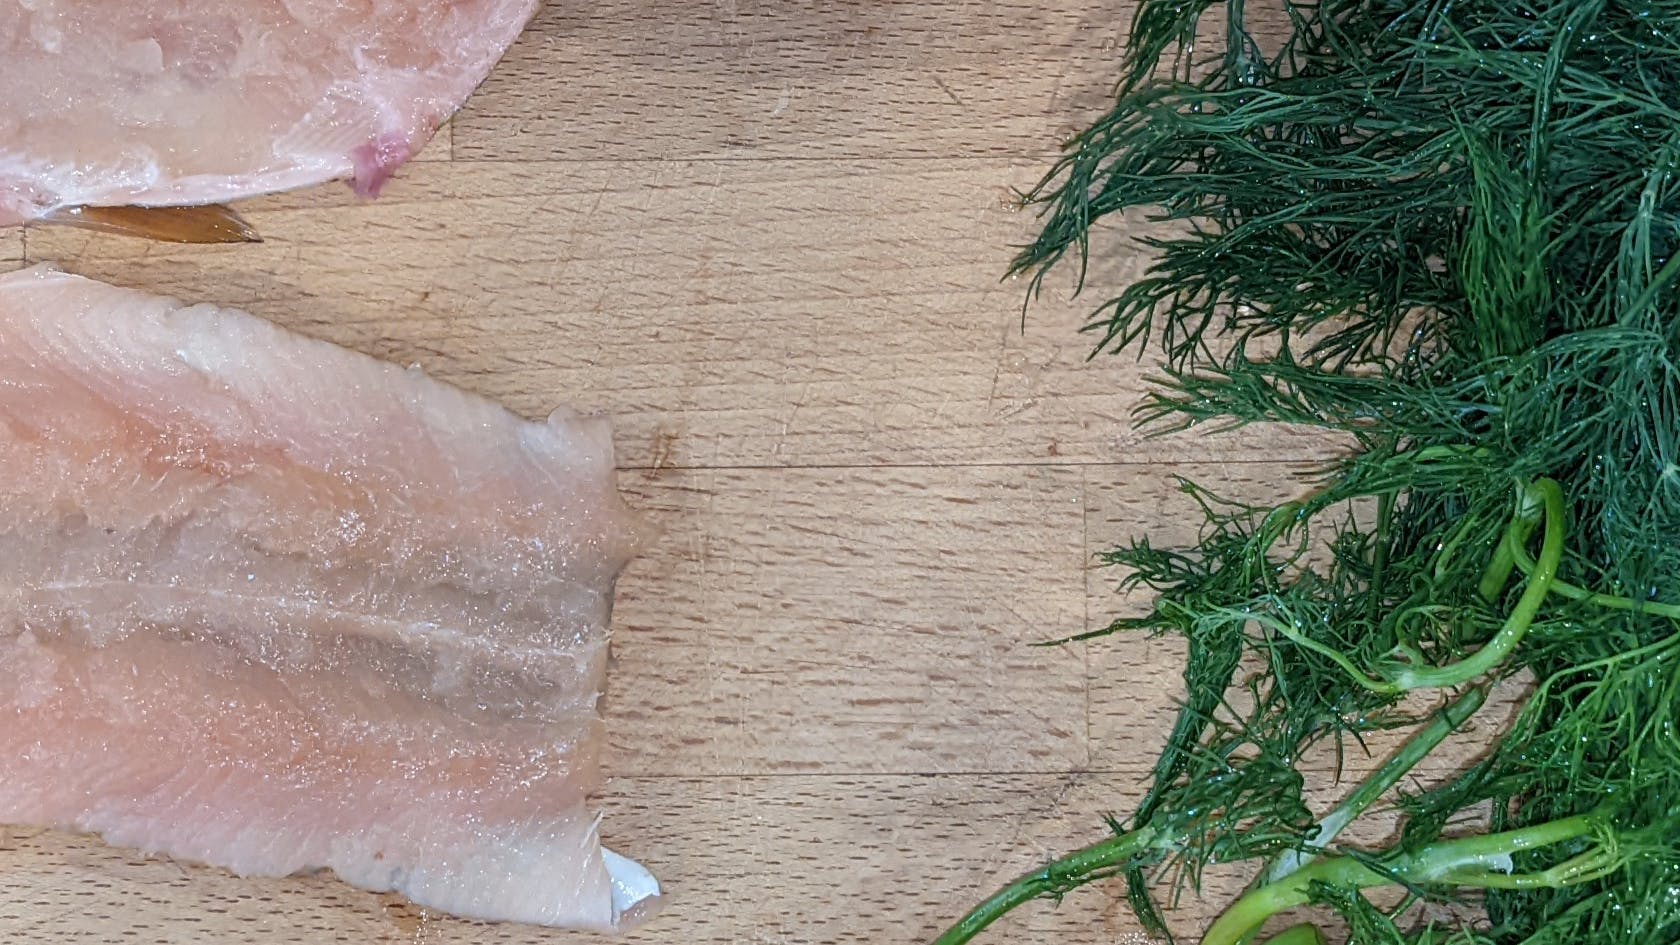 A fish fillet lies on a cutting board with some herbs.